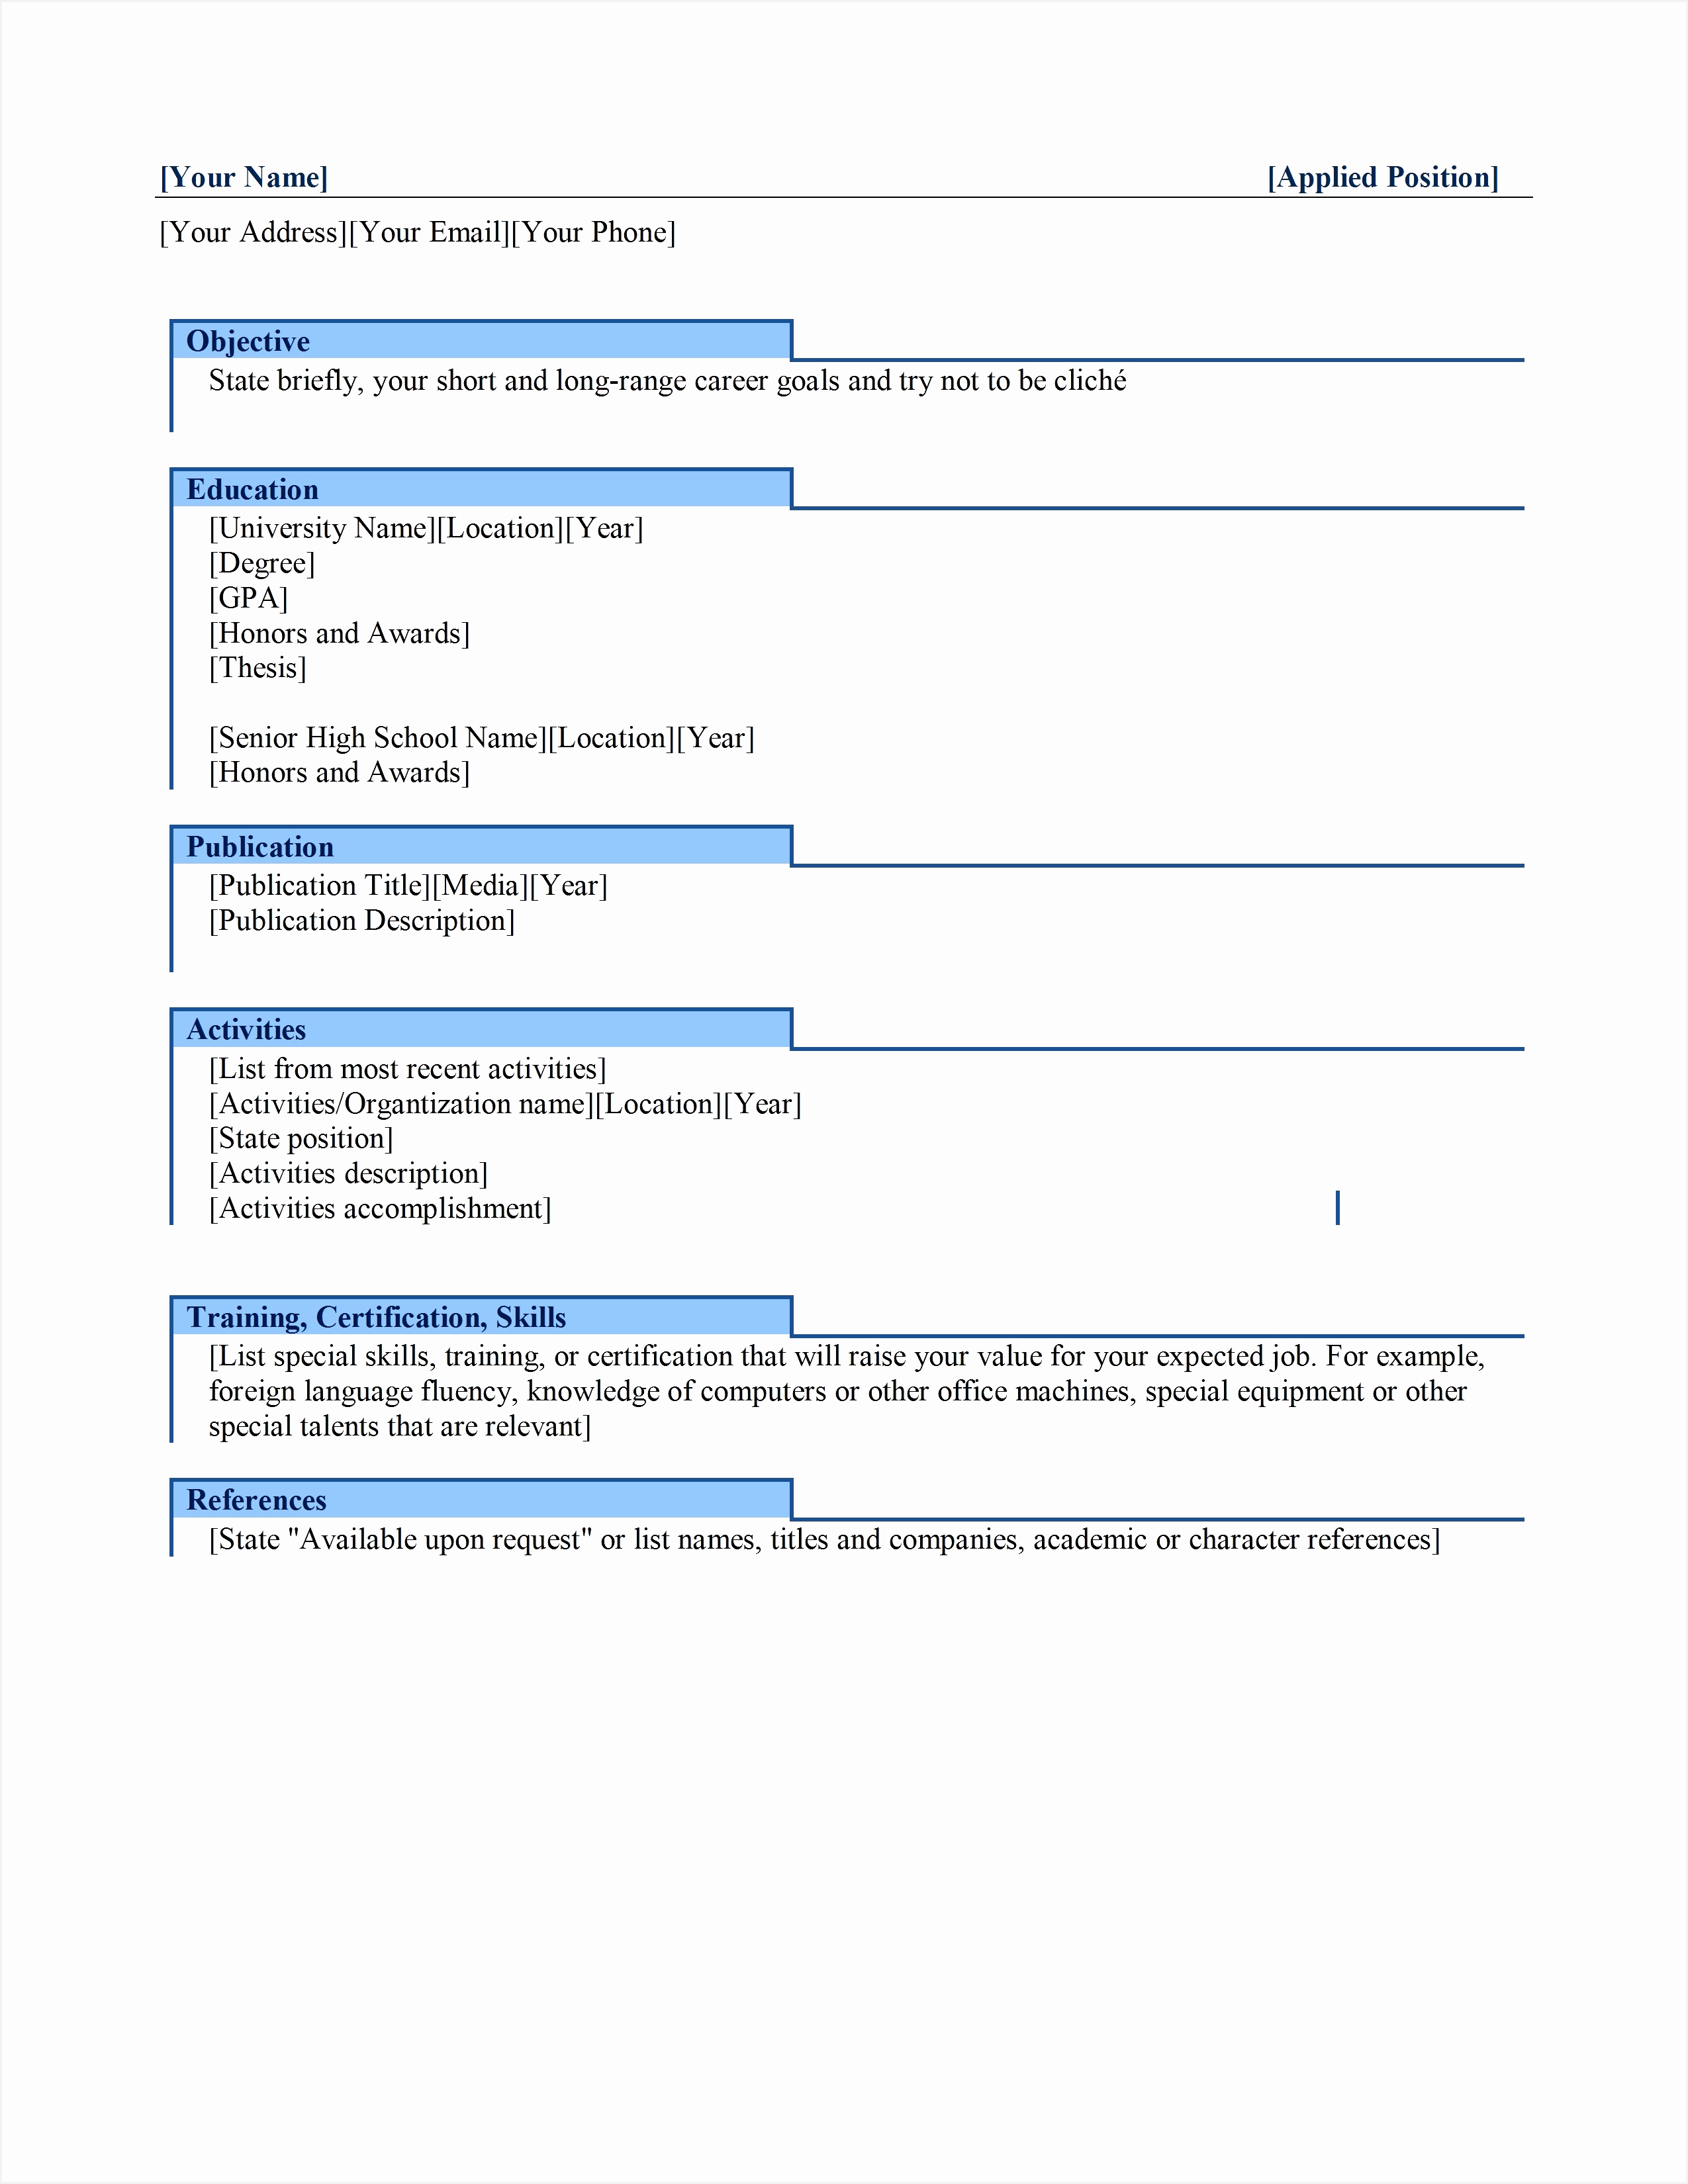 resume top 10 resume templates word 2010 good format in the world33002550